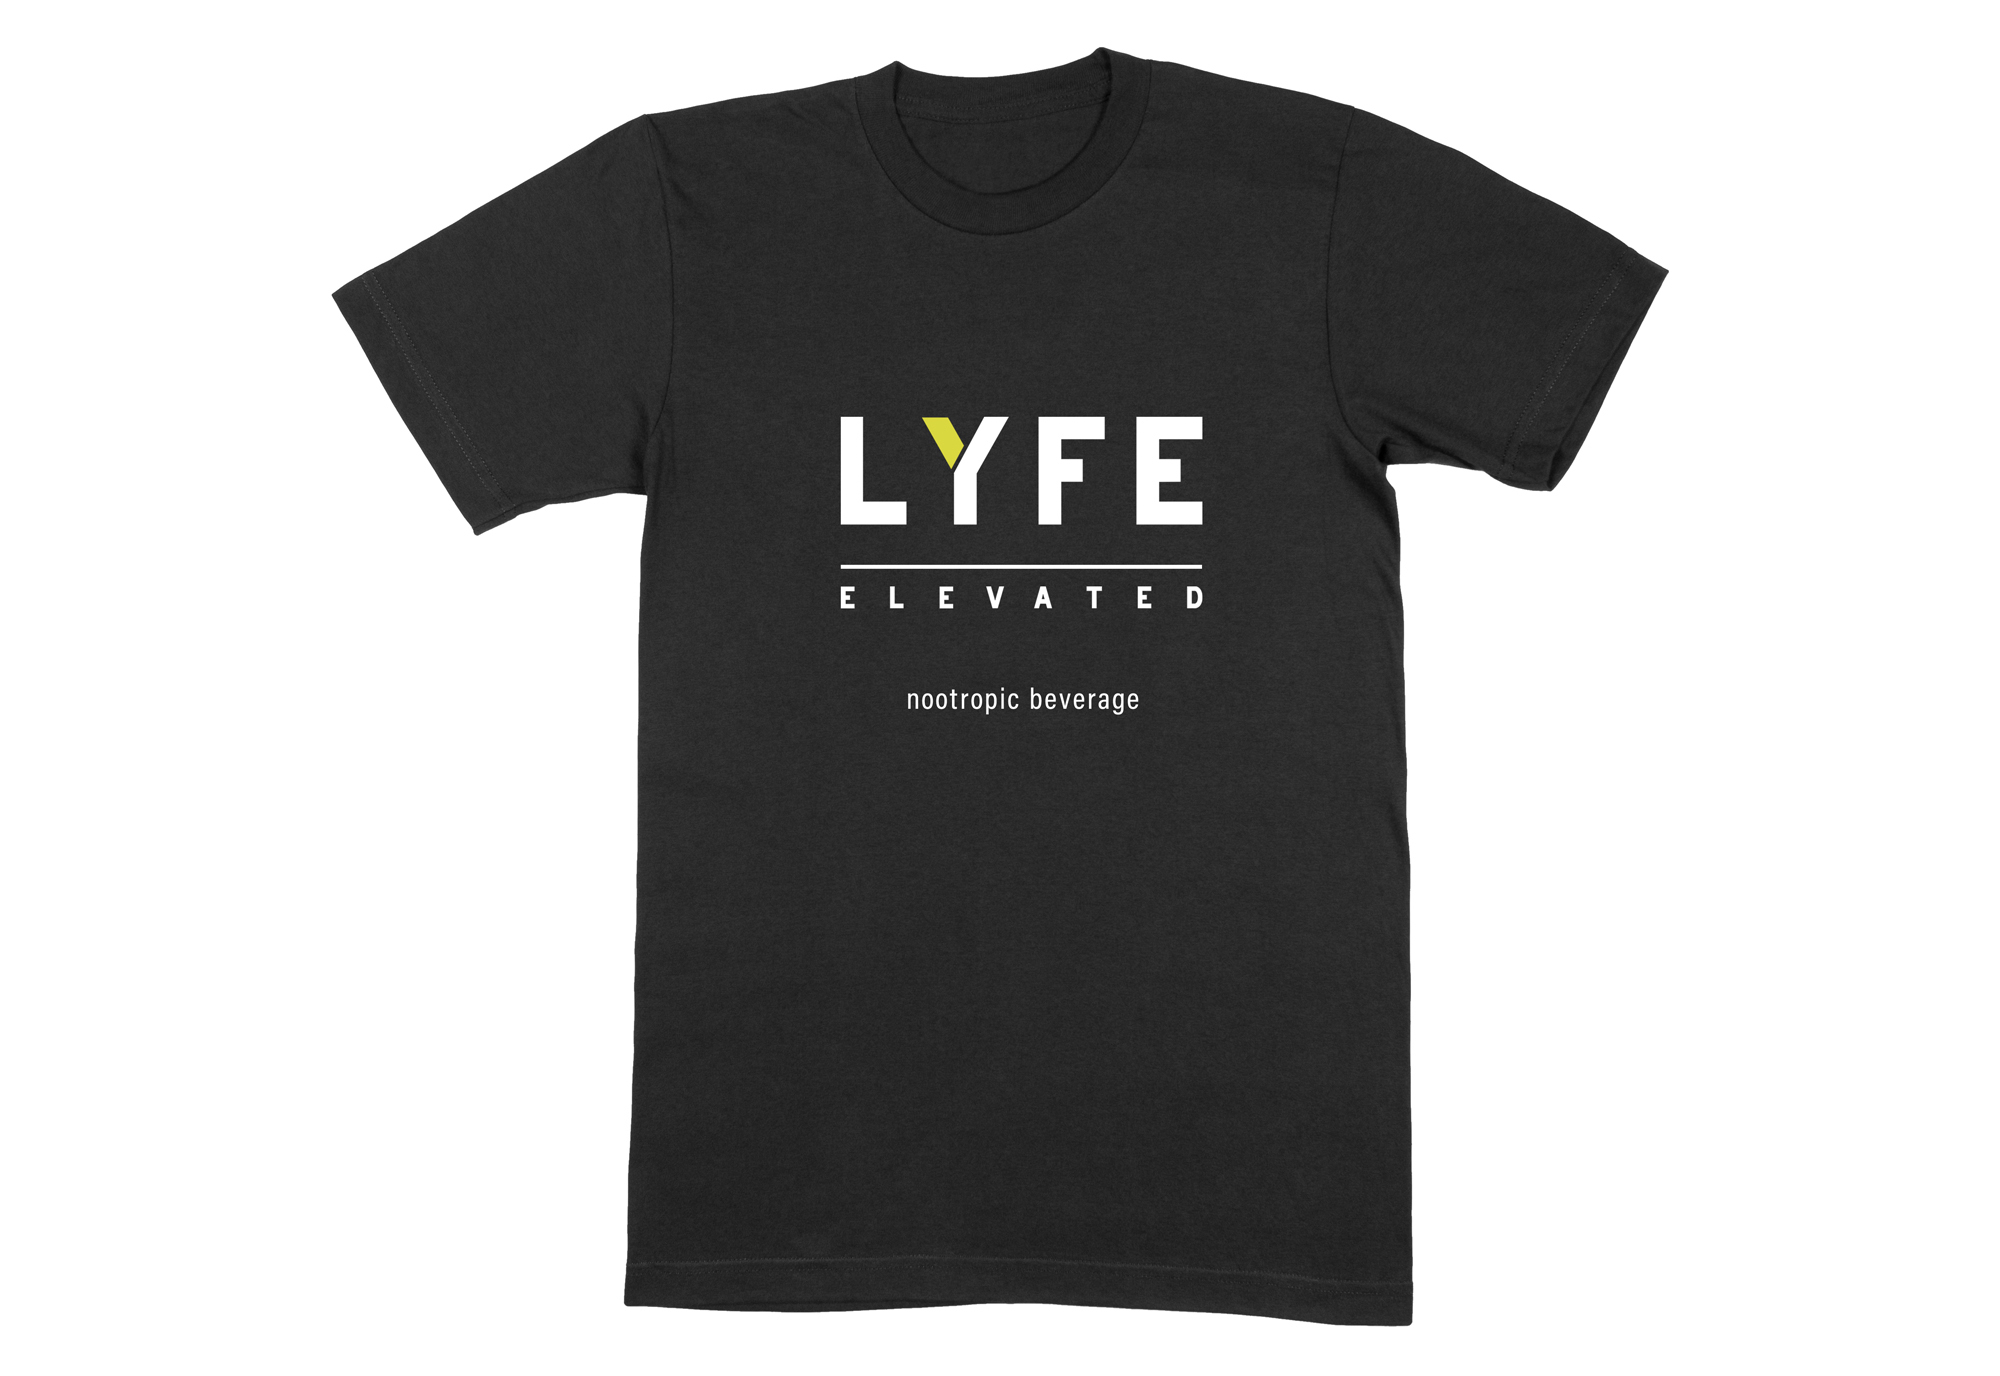 Dalya Kandil designed logos and product packaging for Lyfe Elevated, Micheal Ulisse contributed to marketing and formulations